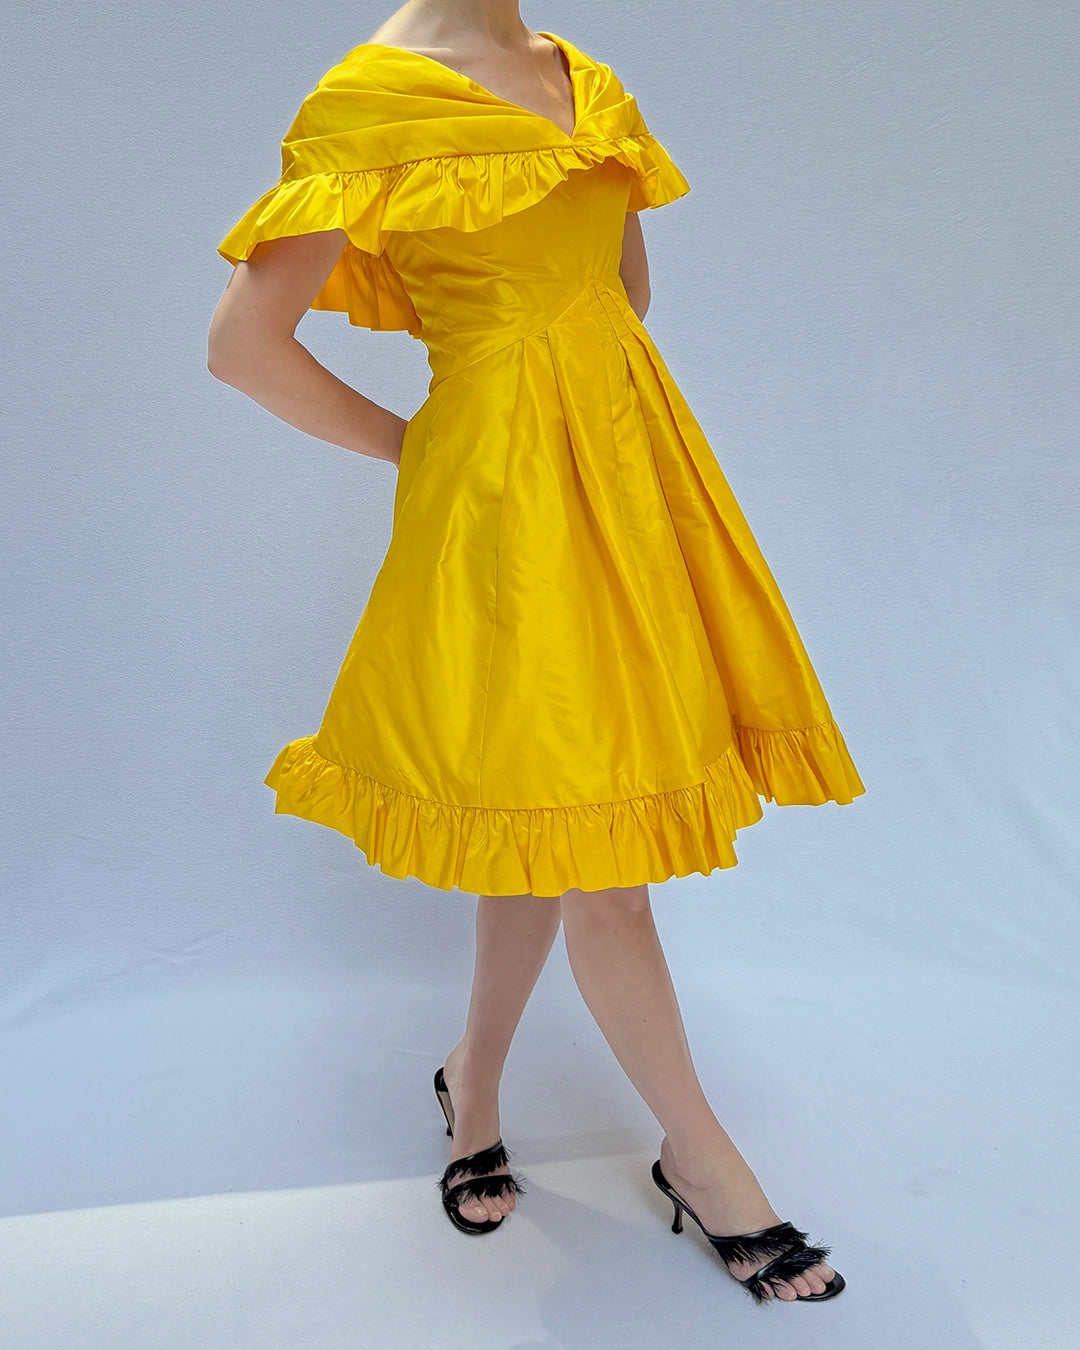 VIintage 1980s Arnold Scassi Cape Collar Ruffled Cocktail Dress